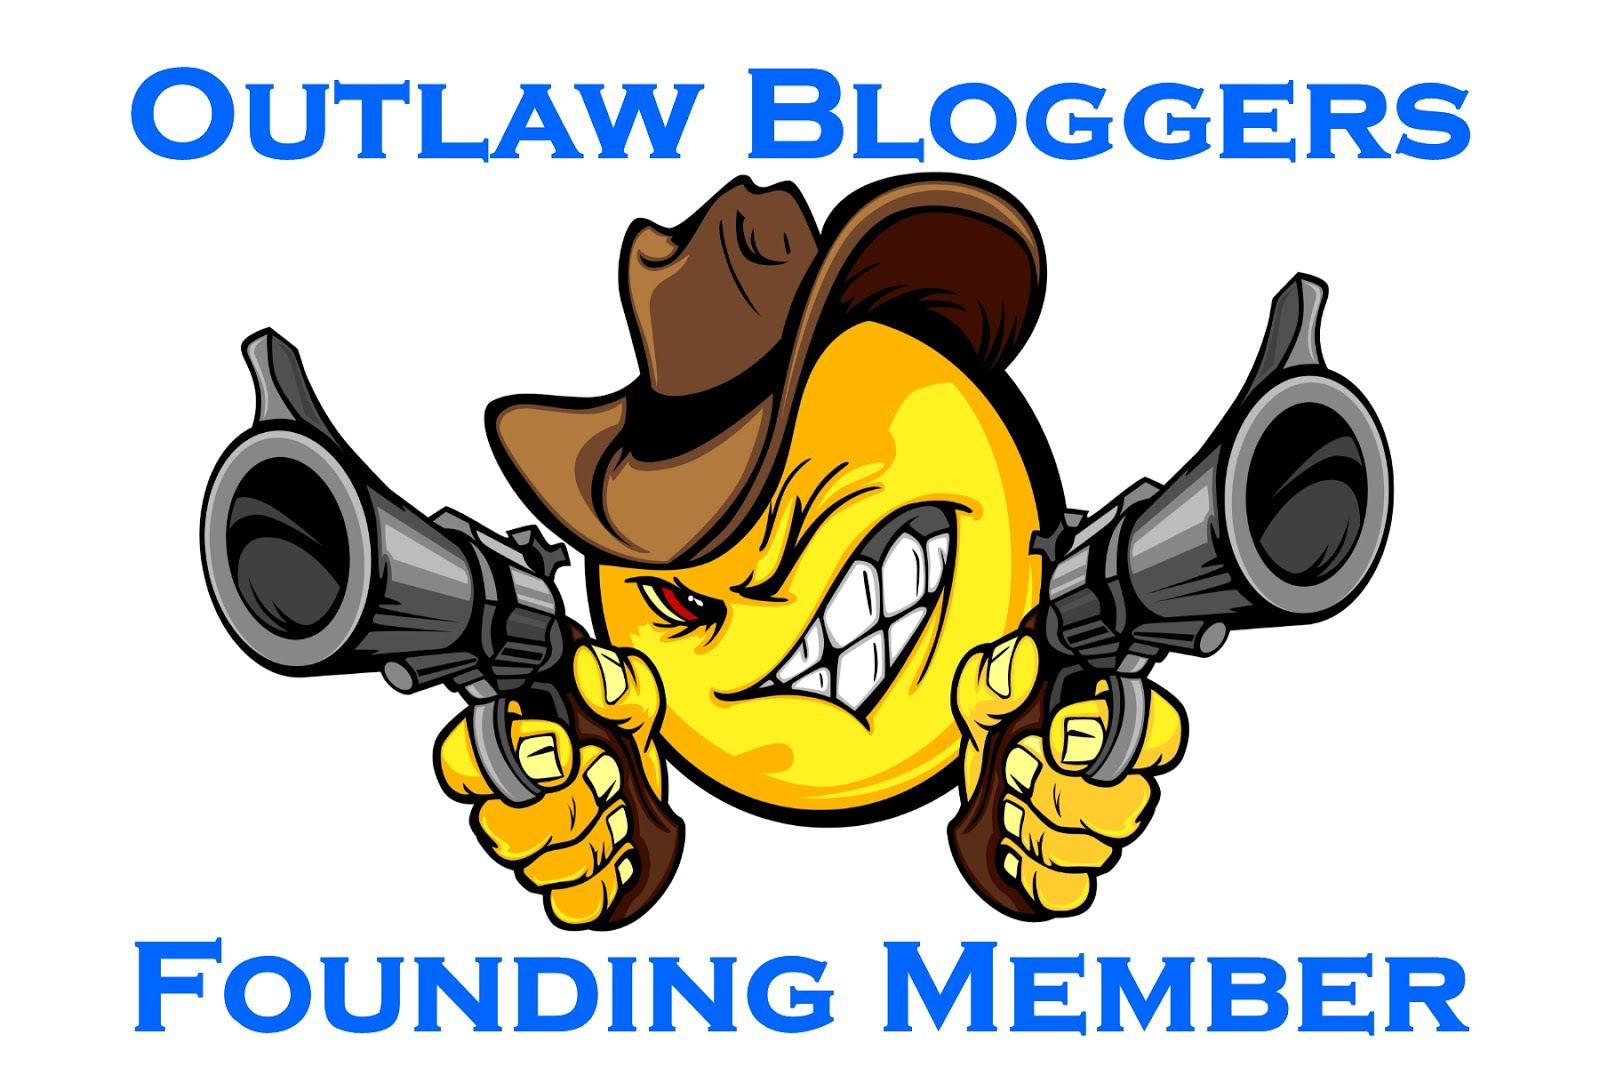 Support Your Outlaw Bloggers!